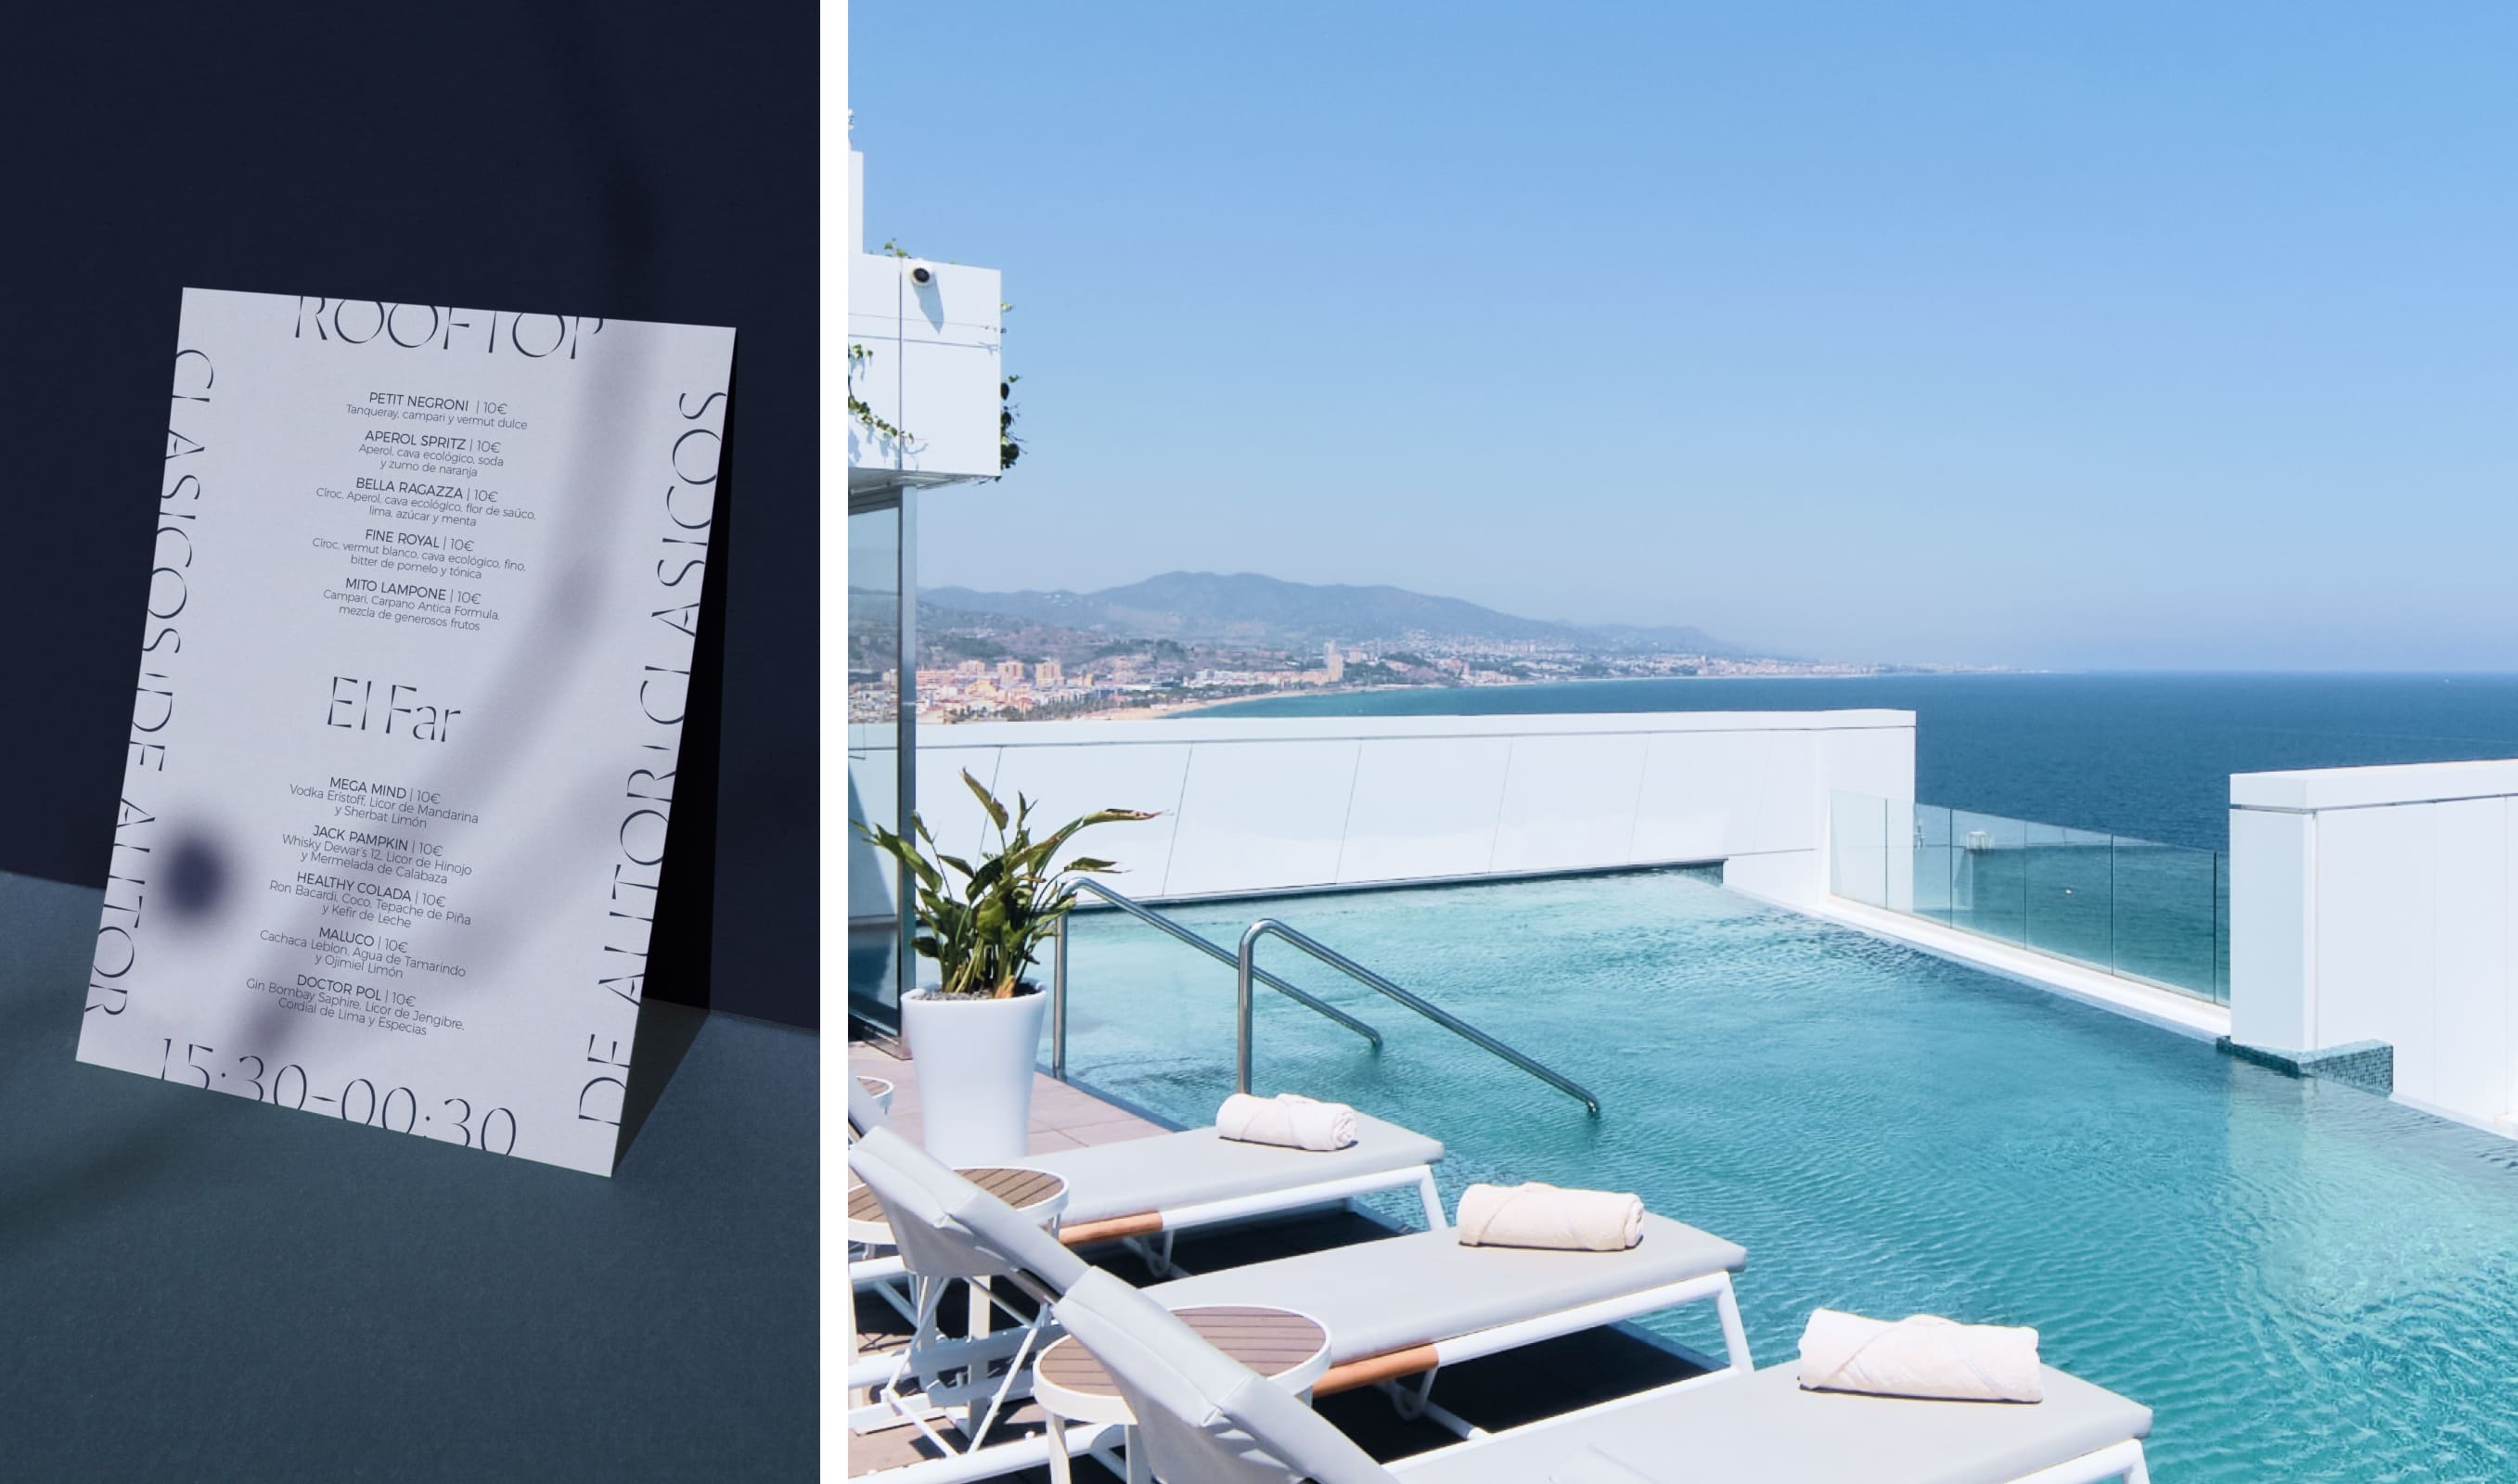 We developed the identity and outlets of the Hotel Marina Badalona, a new Sallés Group hotel with a privileged location and direct connection to Barcelona, which offers luxurious stays, and high-quality gastronomy and wellbeing. 
